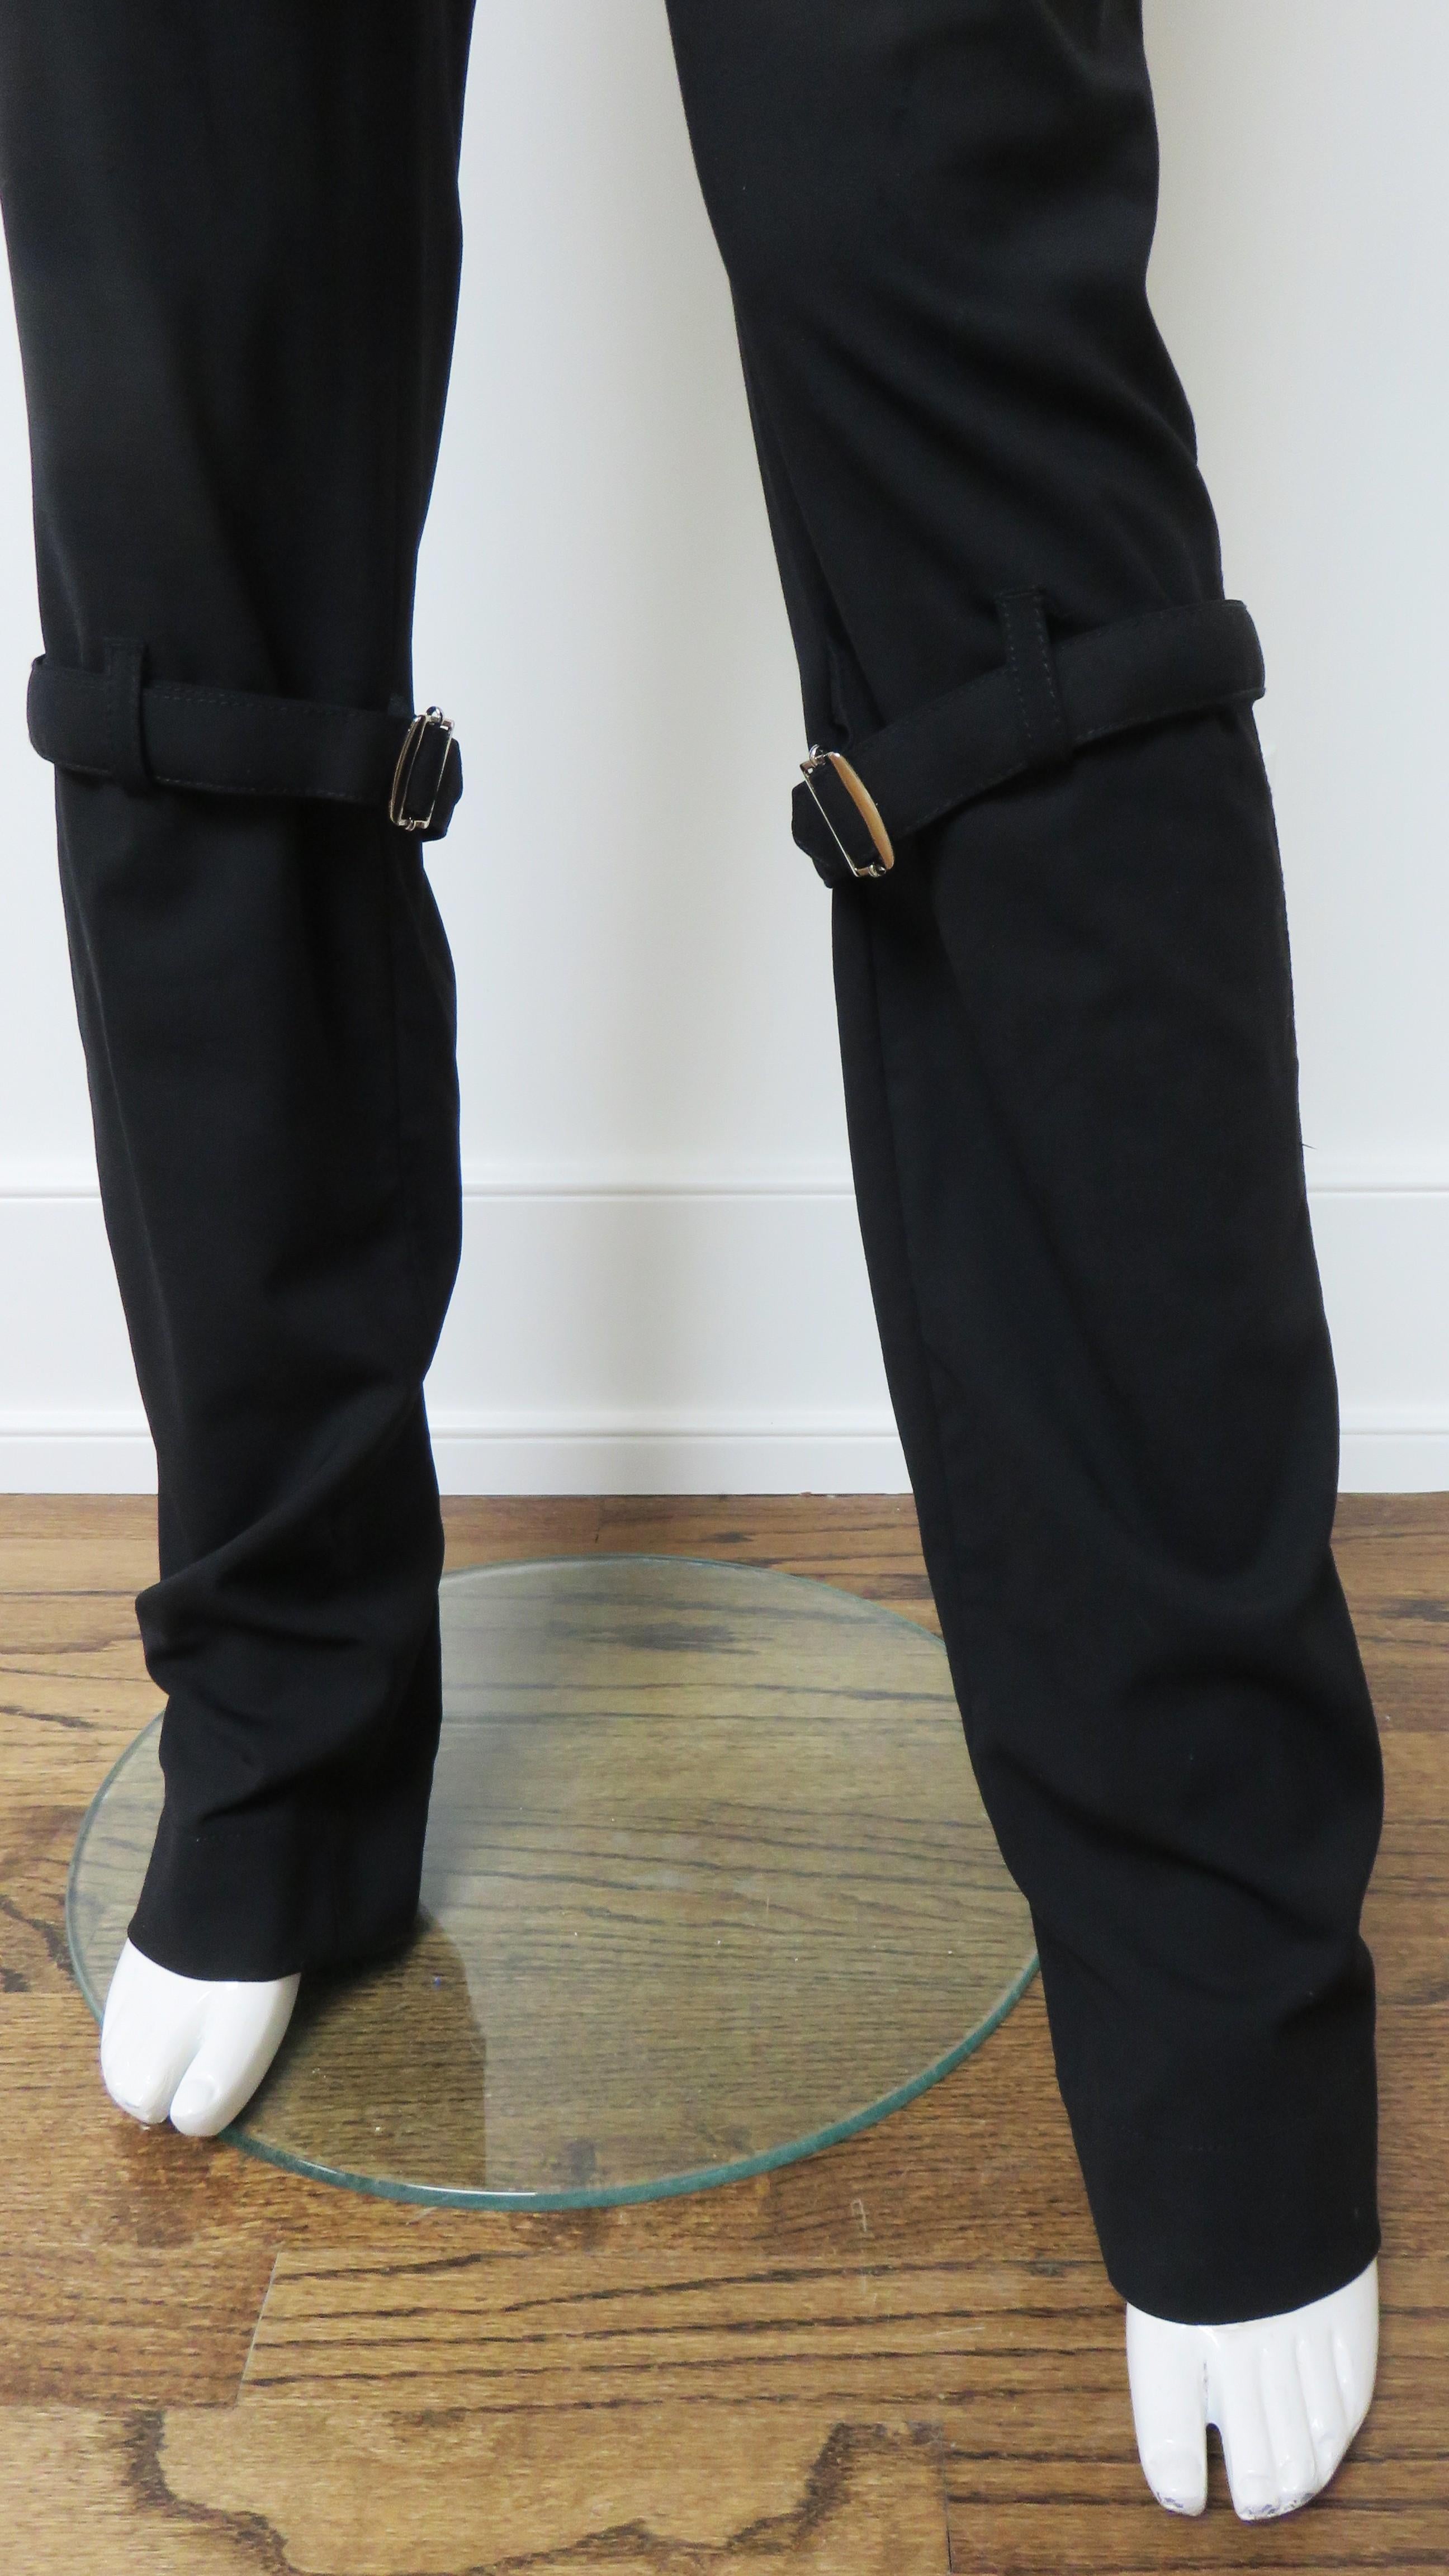 Dolce & Gabbana Pants with Straps and Zippers In Good Condition For Sale In Water Mill, NY